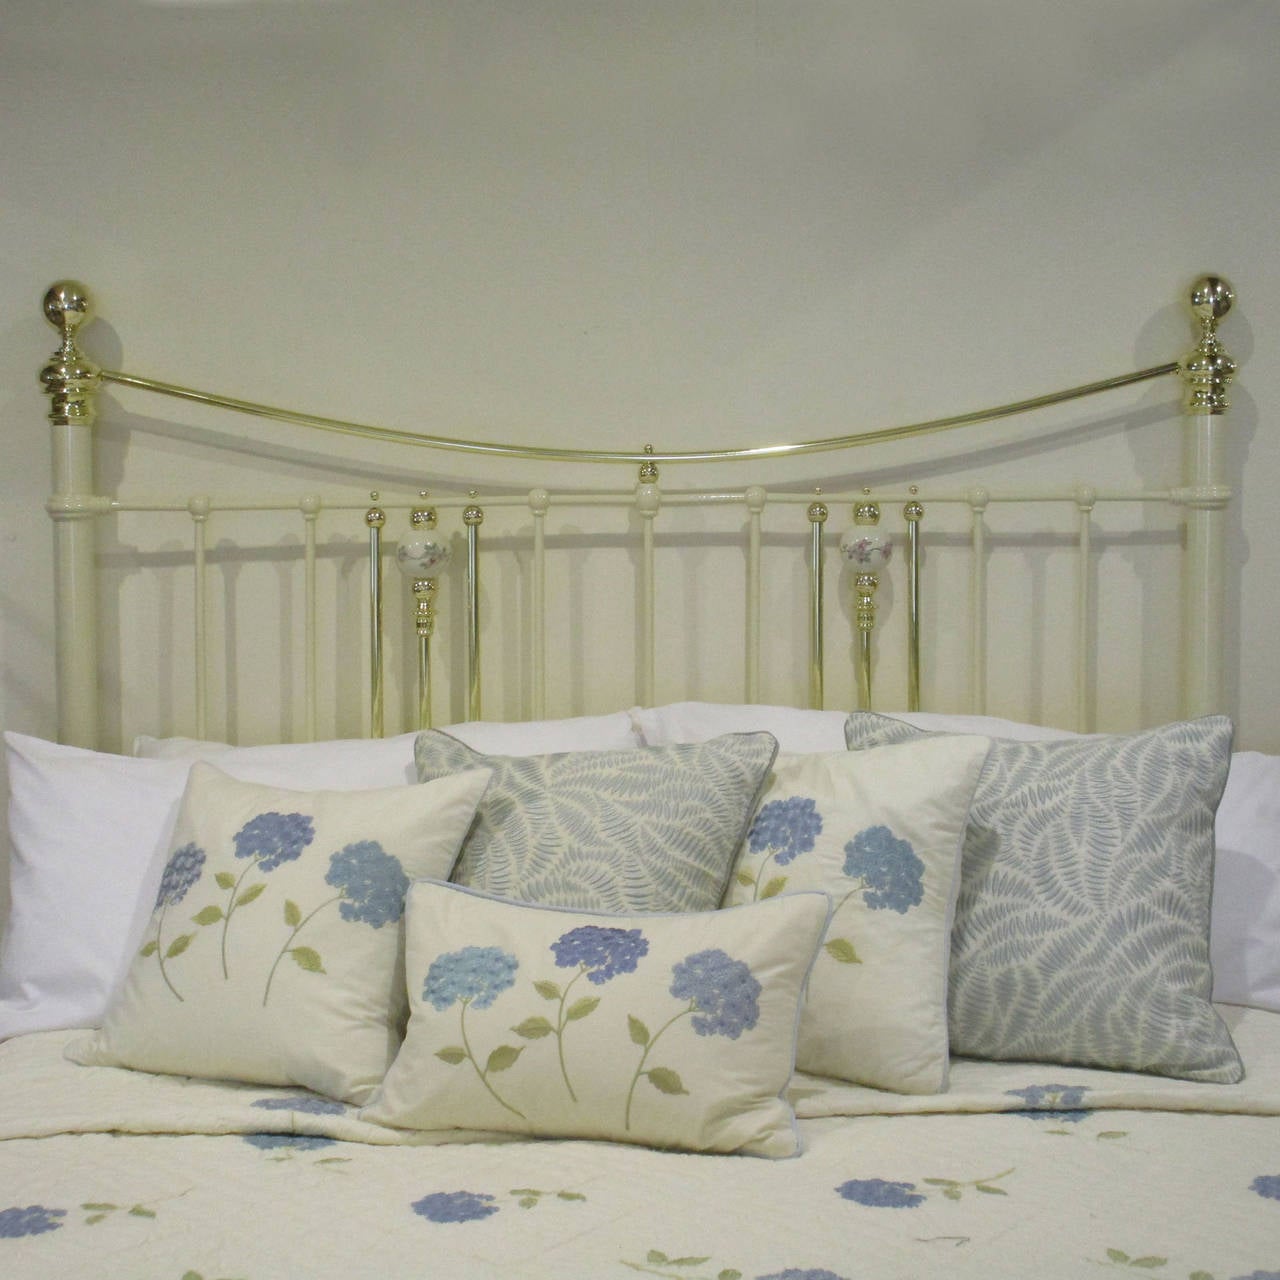 antique brass bed with porcelain